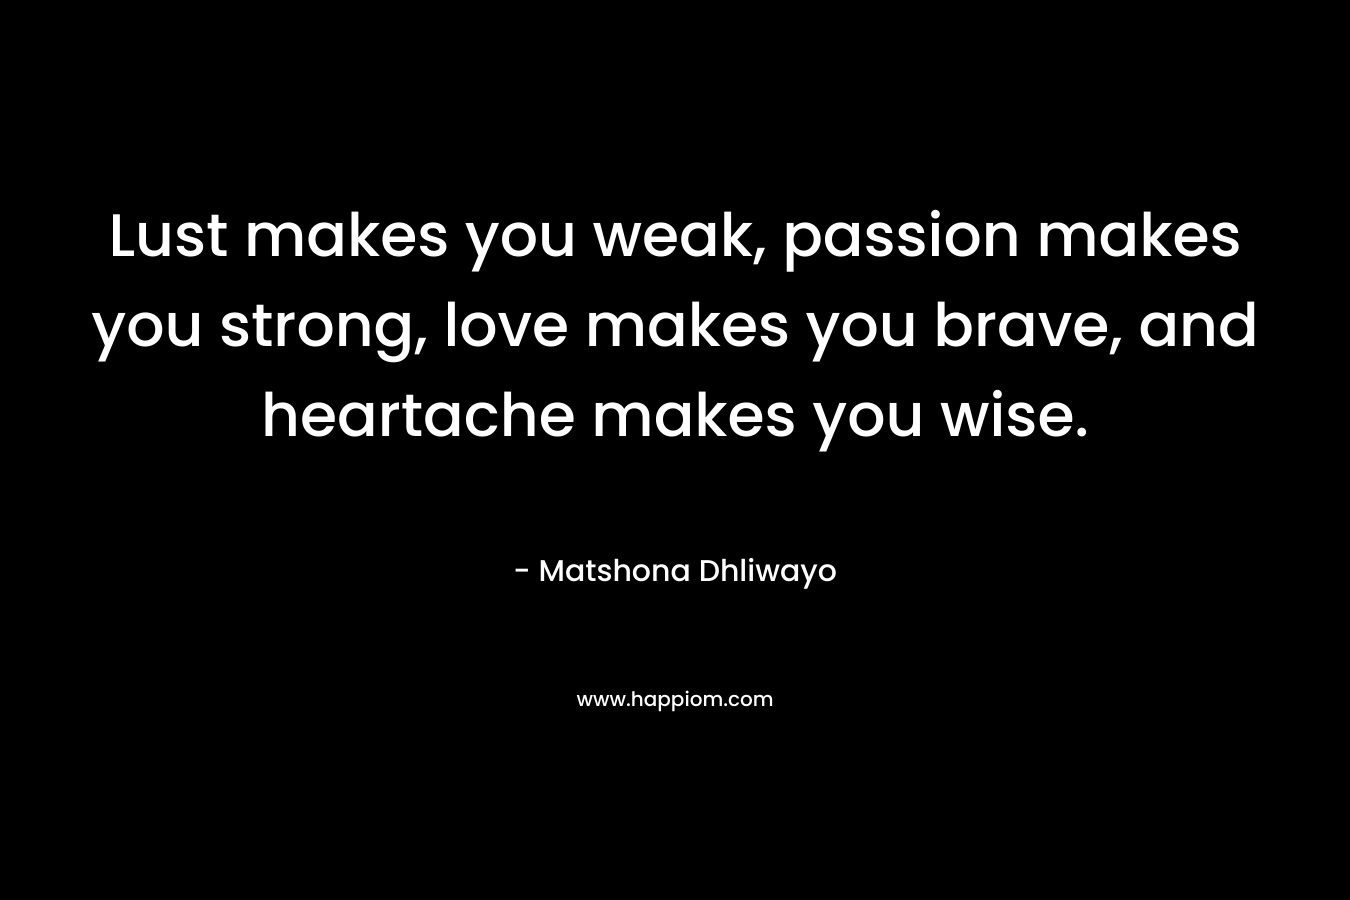 Lust makes you weak, passion makes you strong, love makes you brave, and heartache makes you wise.